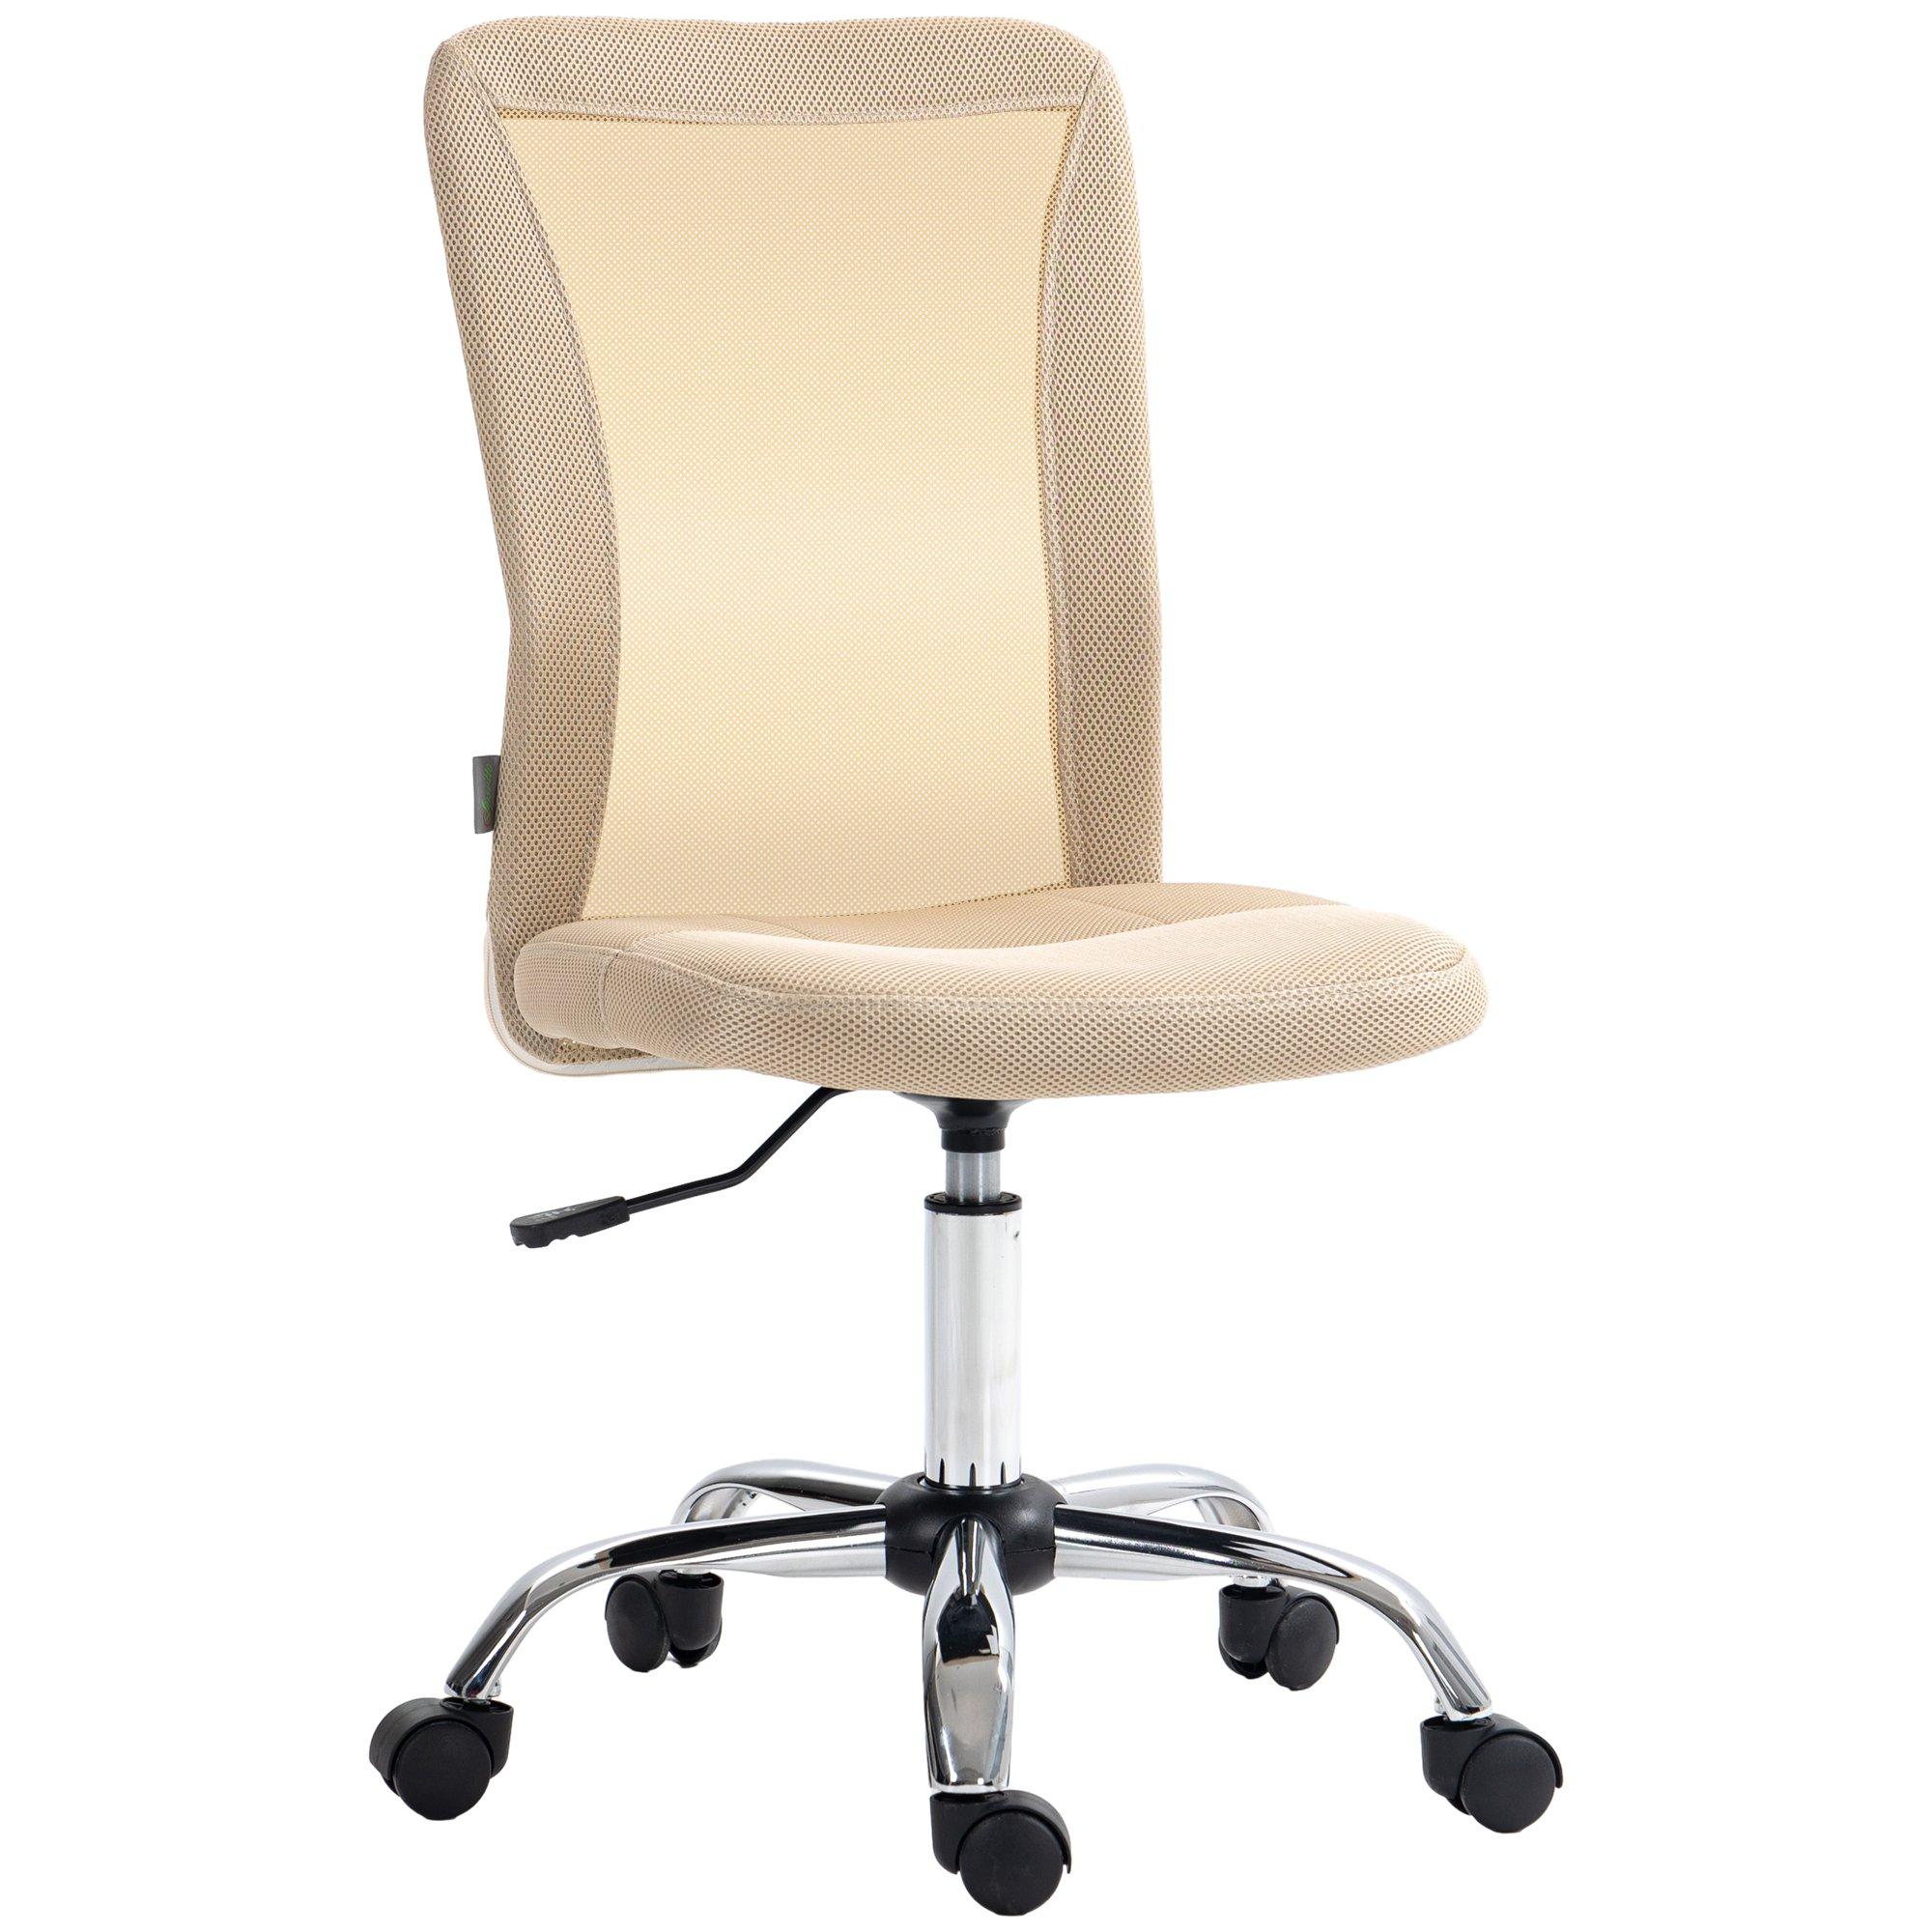 Armless Desk Chair Height Adjustable Mesh Office Chair with 5 Wheels